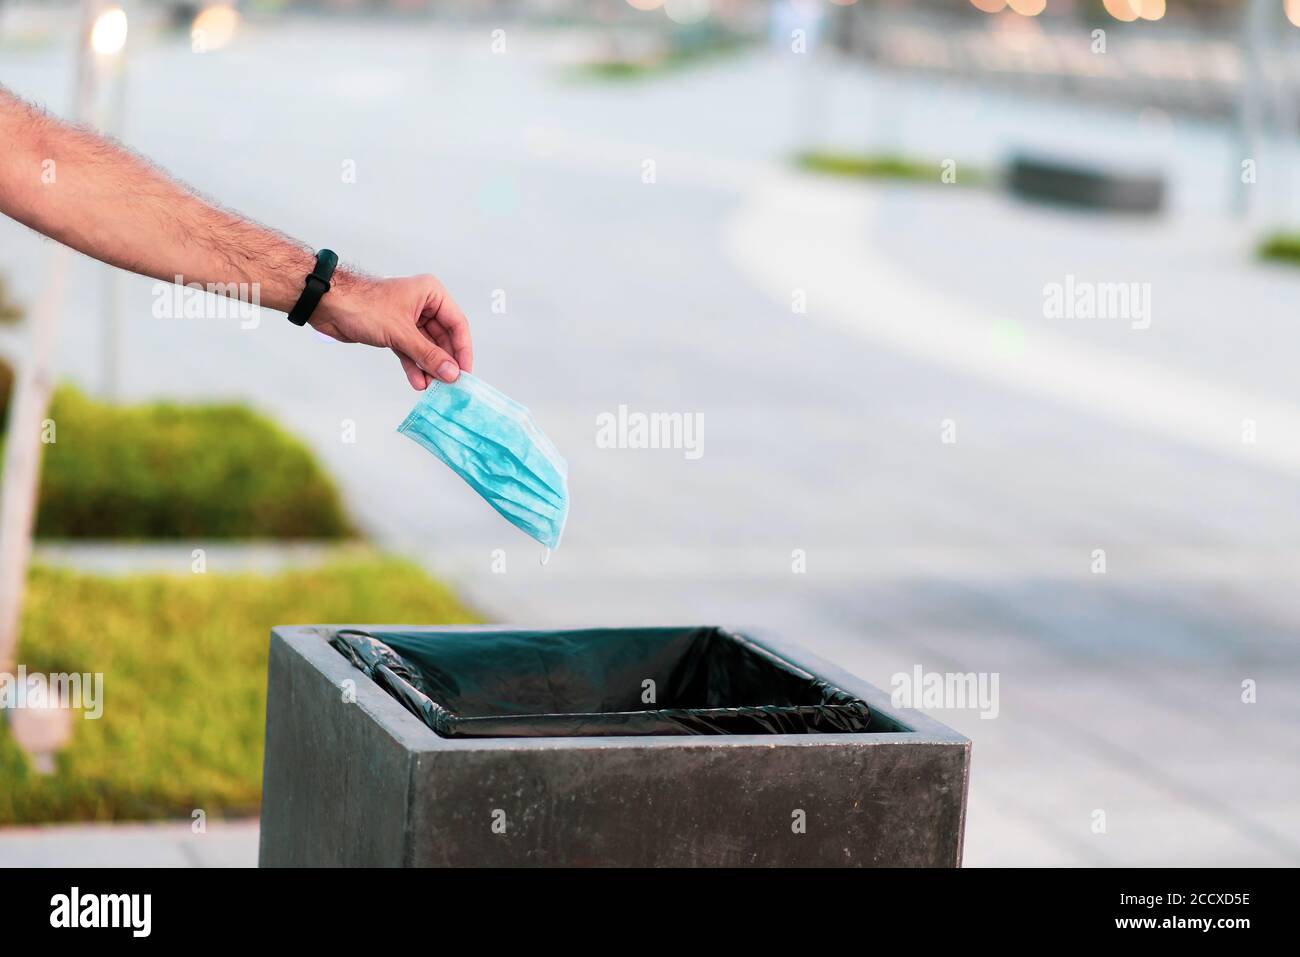 Man throwing used disposable protective surgical mask into the garbage bin closeup Stock Photo